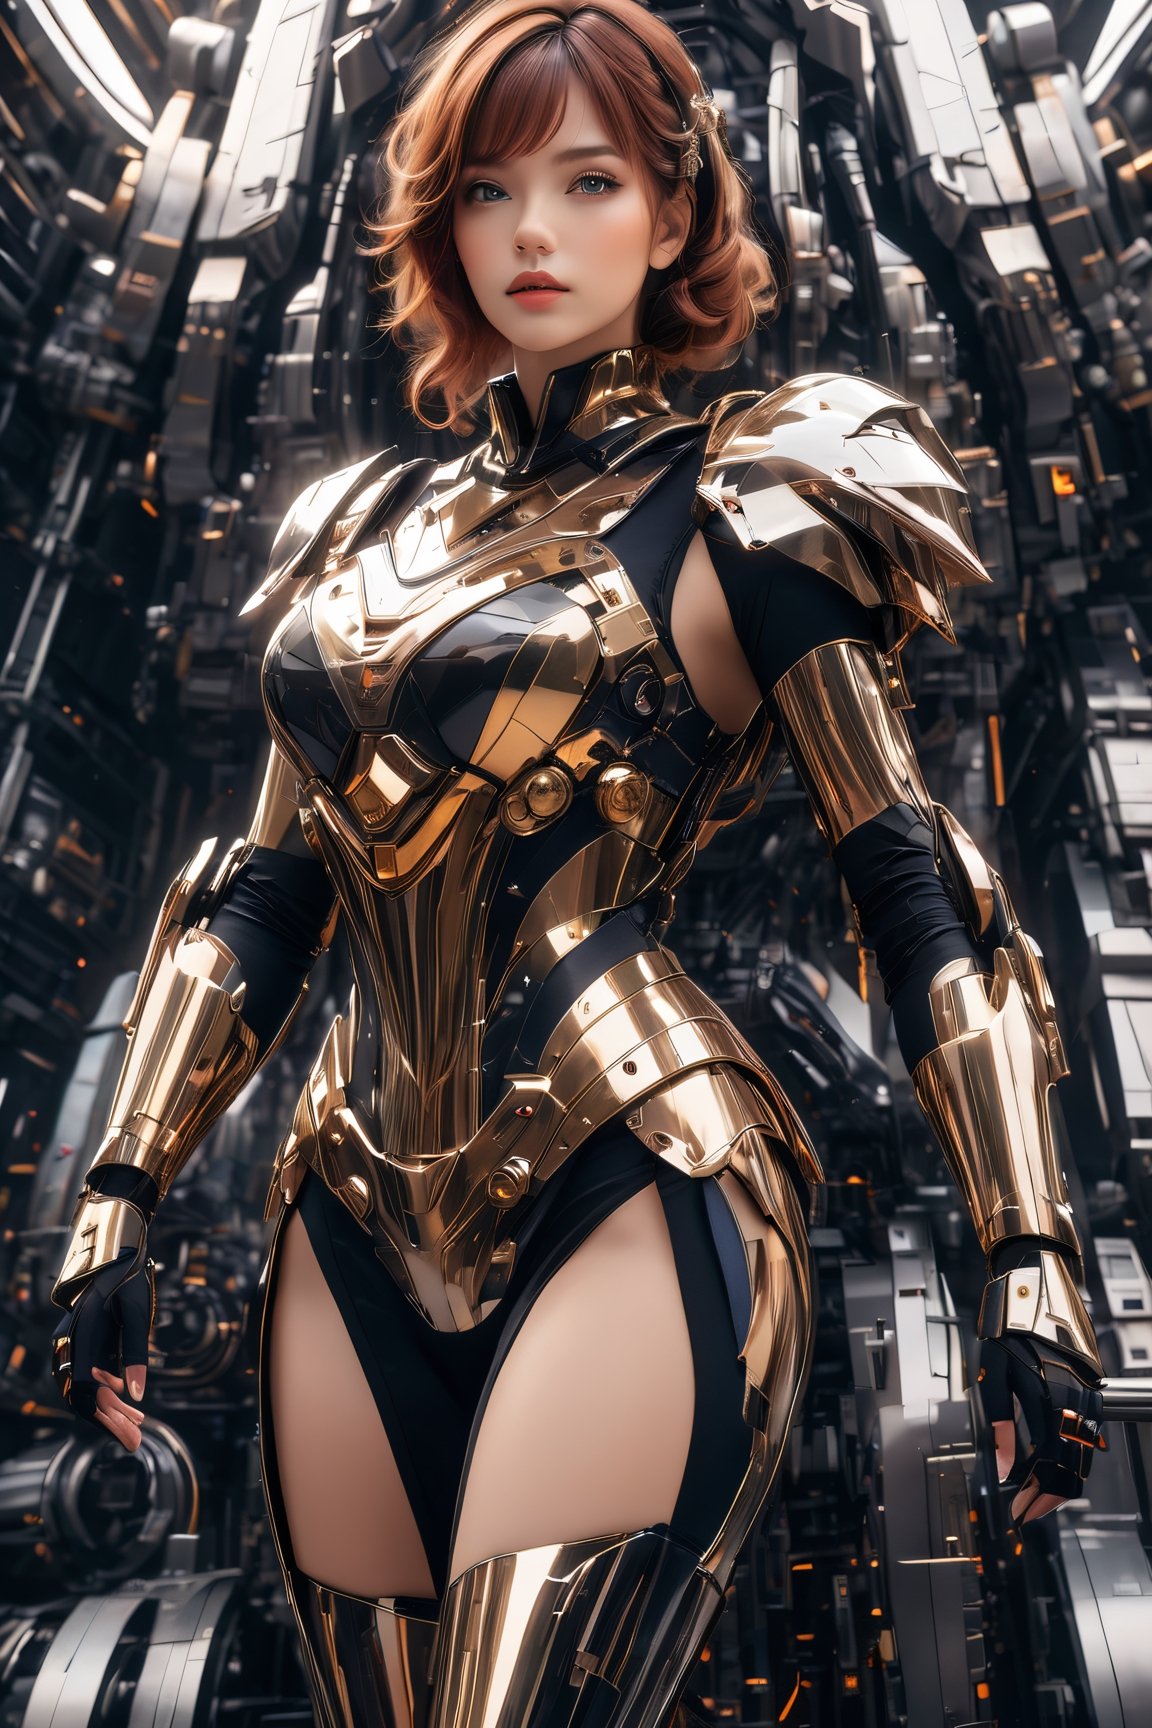 fierce beauty ((full body)), her brown hair with blonde highlights on her bangs cascading down the side of her face and shoulders, standing inside of a MECH suit, (masterpiece, top quality, best quality, official art, beautiful and aesthetic:1.2), (1girl), extreme detailed,(fractal art:1.3),colorful,highest detailed,zoomout,perfecteyes, random hairstyle
,alluring_lolita_girl,RedHoodWaifu,beautymix,futurecamisole,mecha,xxmix_girl,Movie Still,Film Still,Wearing edgTemptation,Cinematic,p3rfect boobs,skirtlift,cleavage,Cinematic Shot,Cinematic Lighting,aesthetic portrait,photo r3al